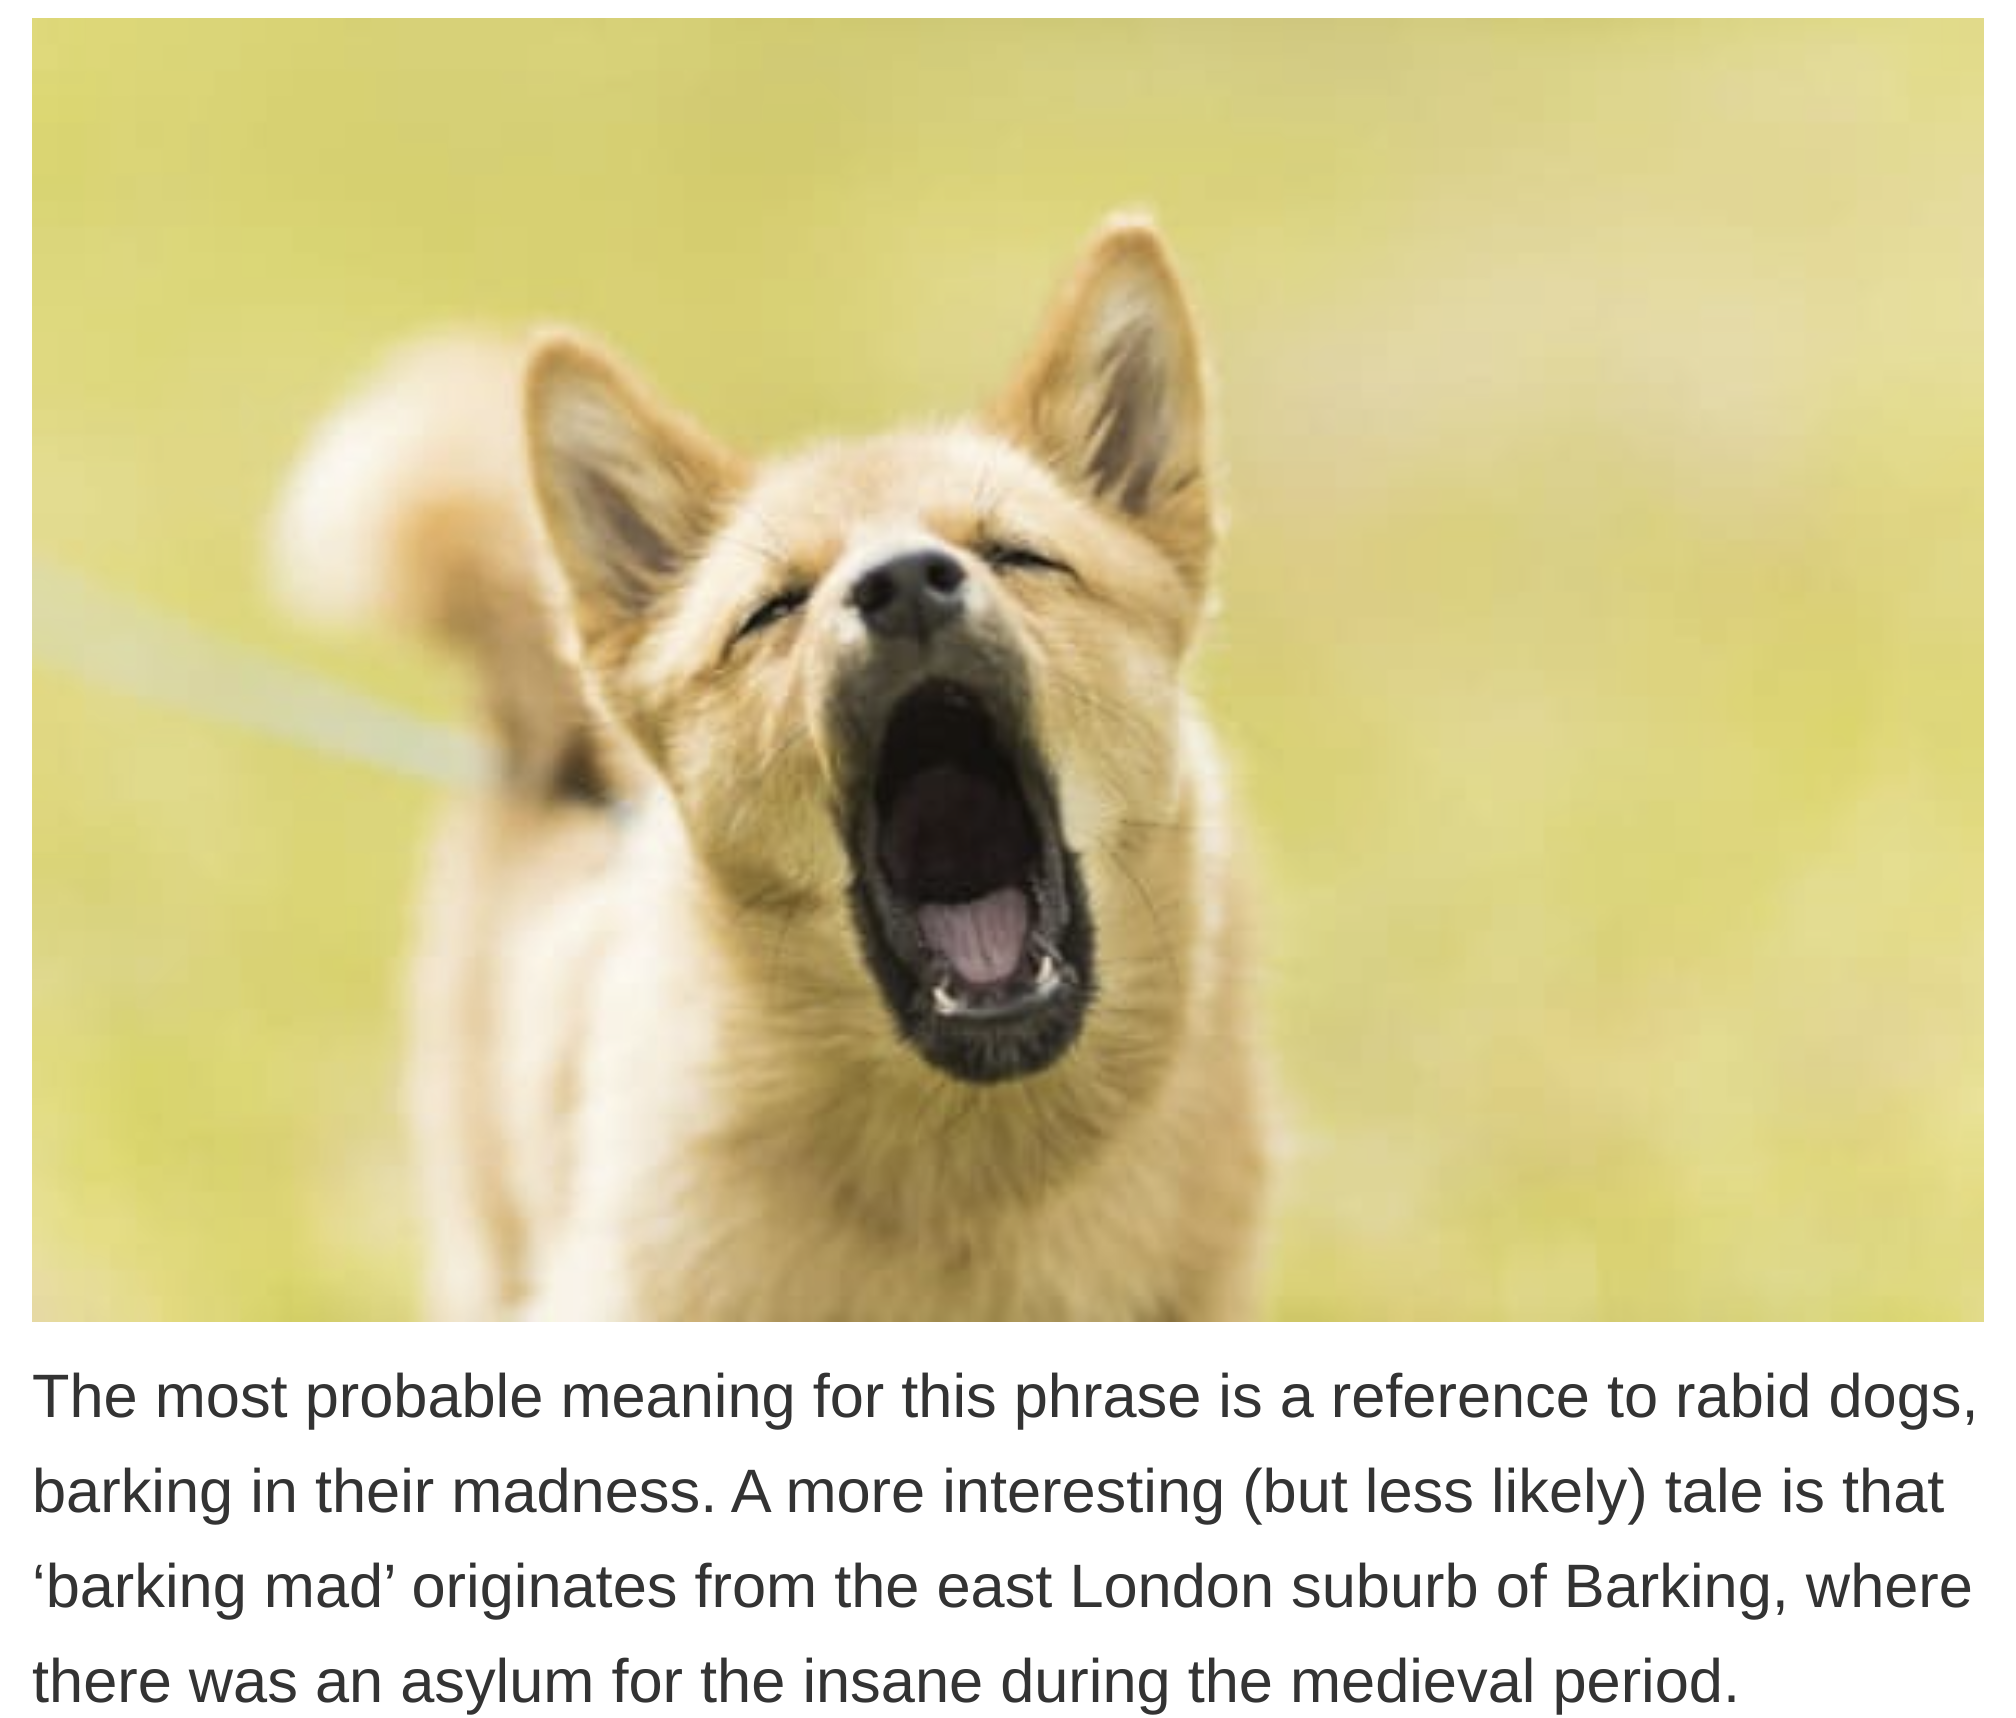 etymology english language - The most probable meaning for this phrase is a reference to rabid dogs, barking in their madness. A more interesting but less ly tale is that 'barking mad' originates from the east London suburb of Barking, where there was an 